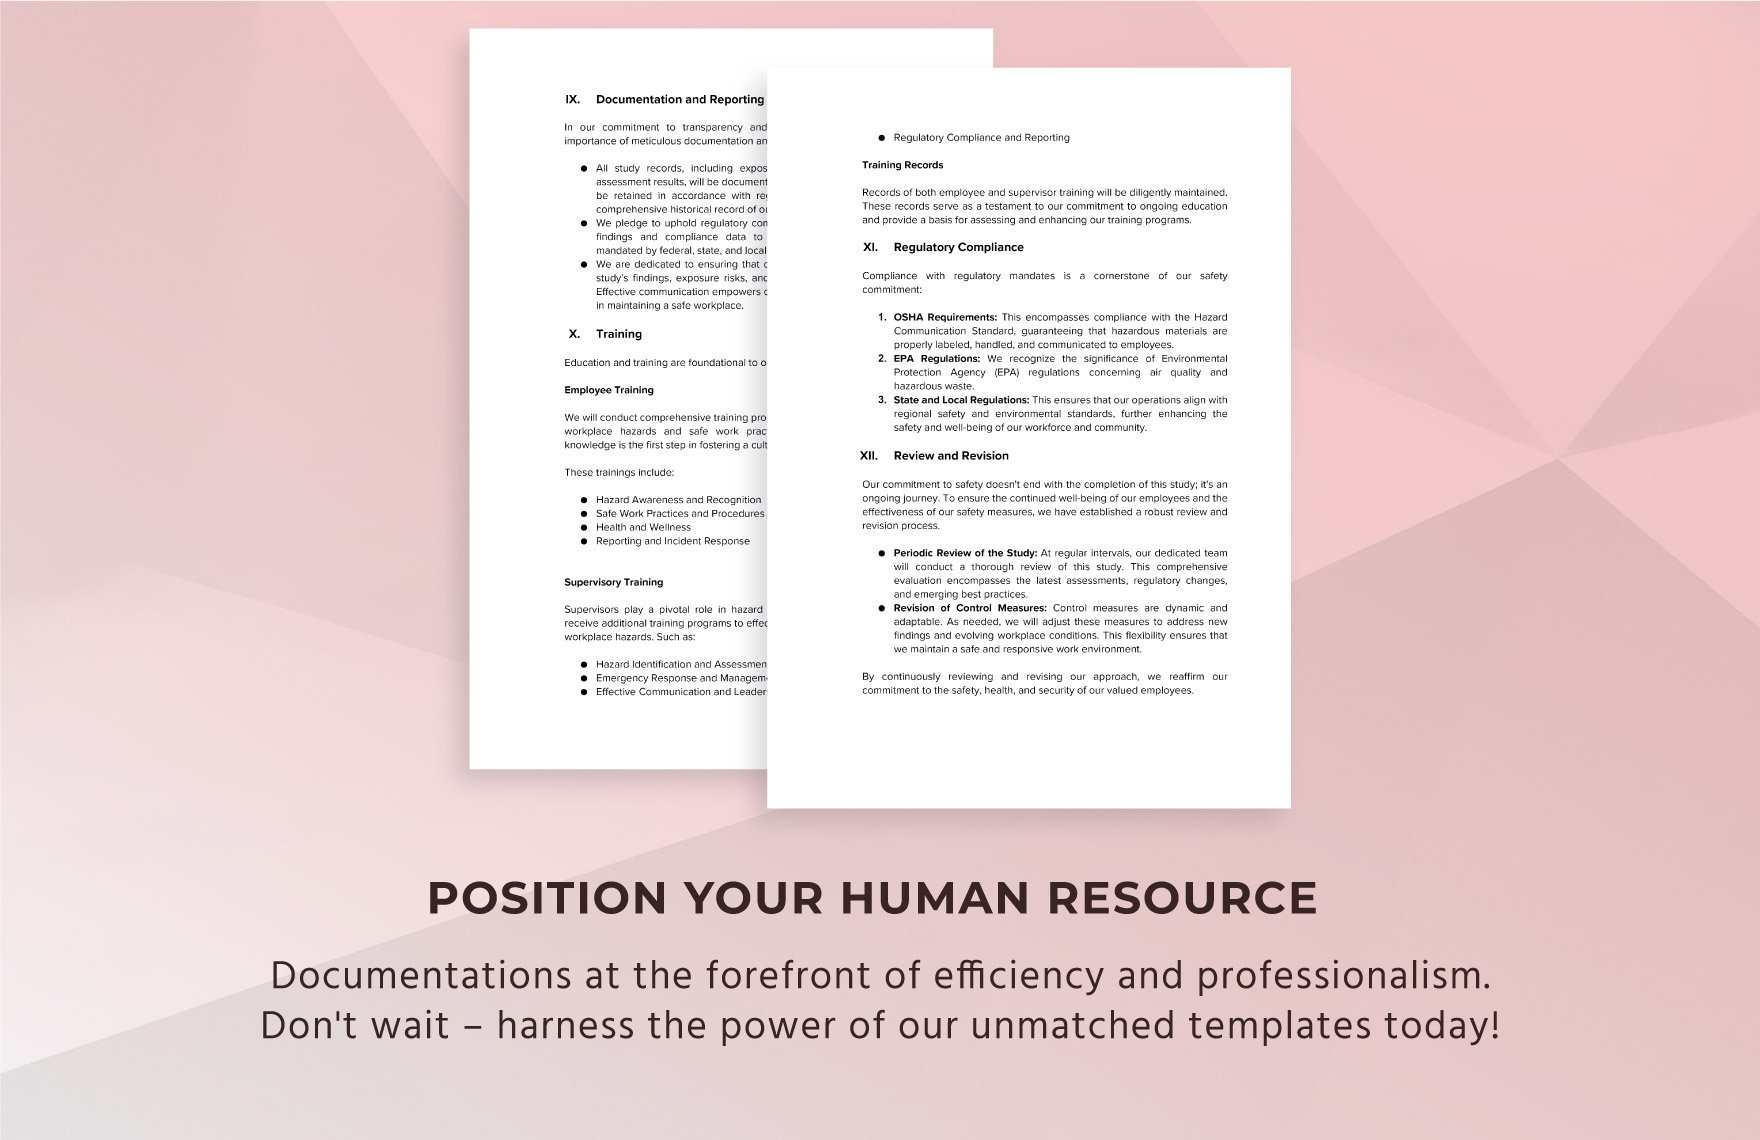 Industrial Hygiene and Air Quality Study HR Template